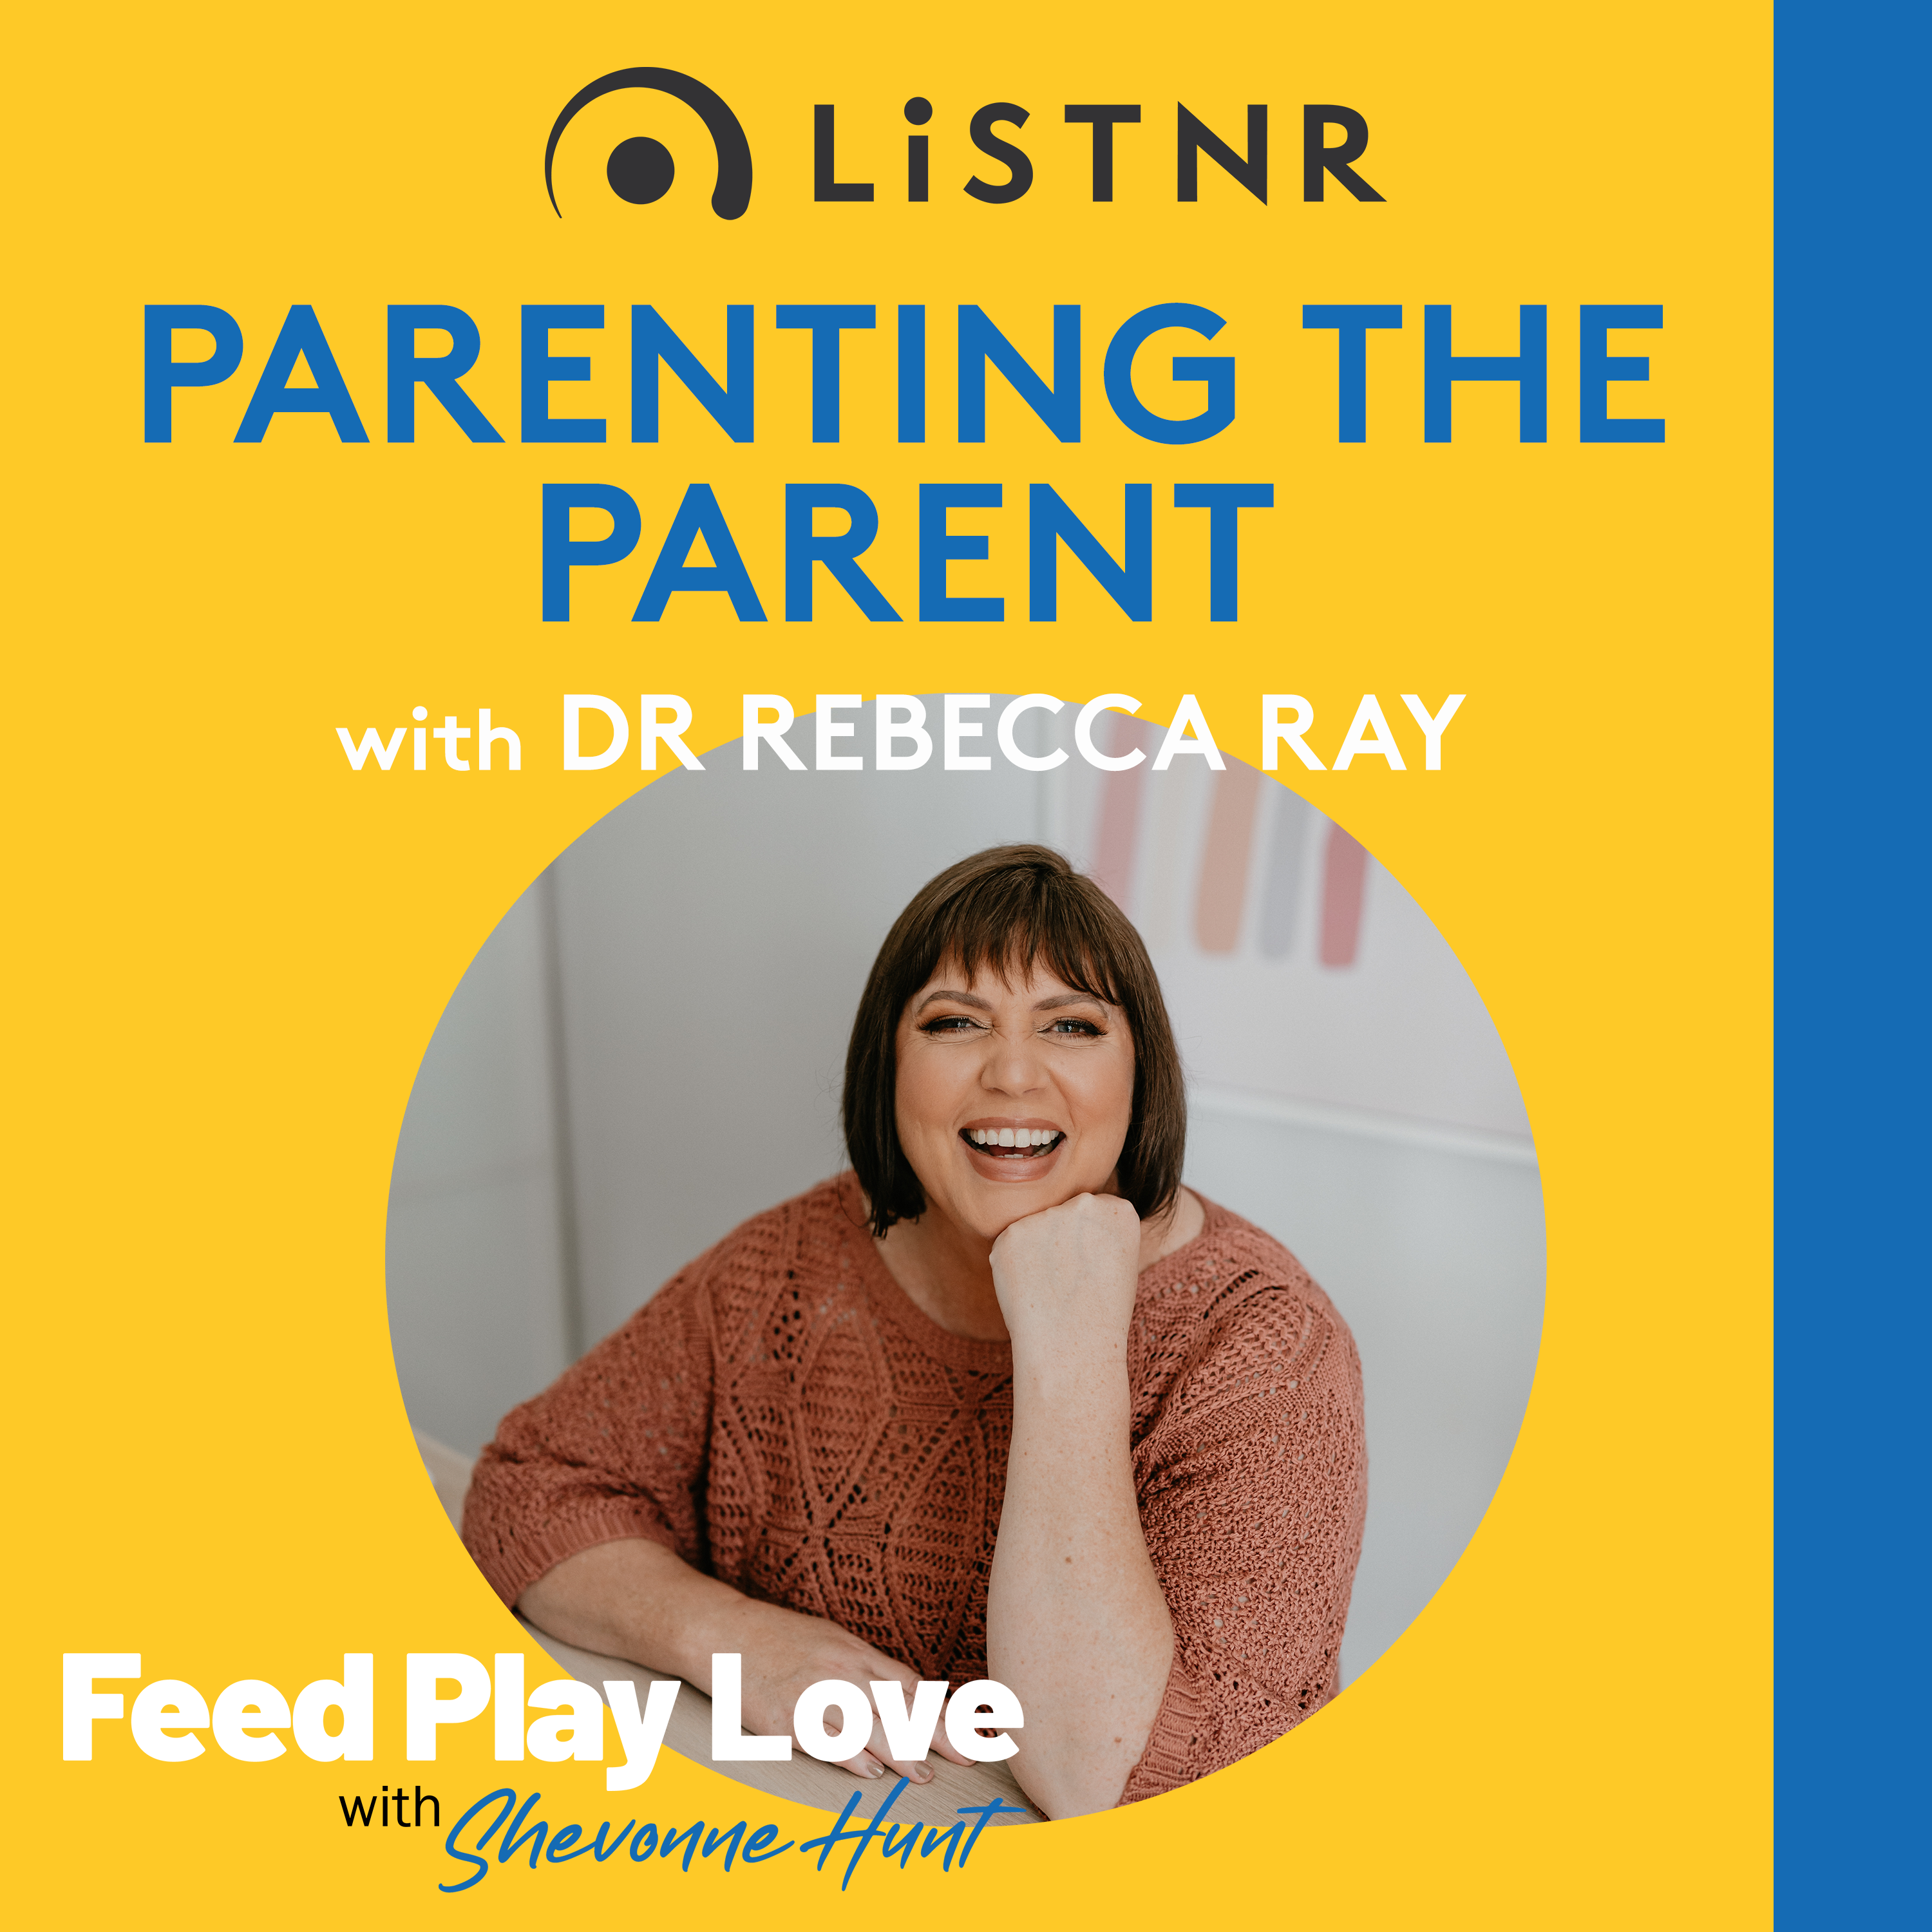 Parenting together (Parenting the Parent with Dr Rebecca Ray)